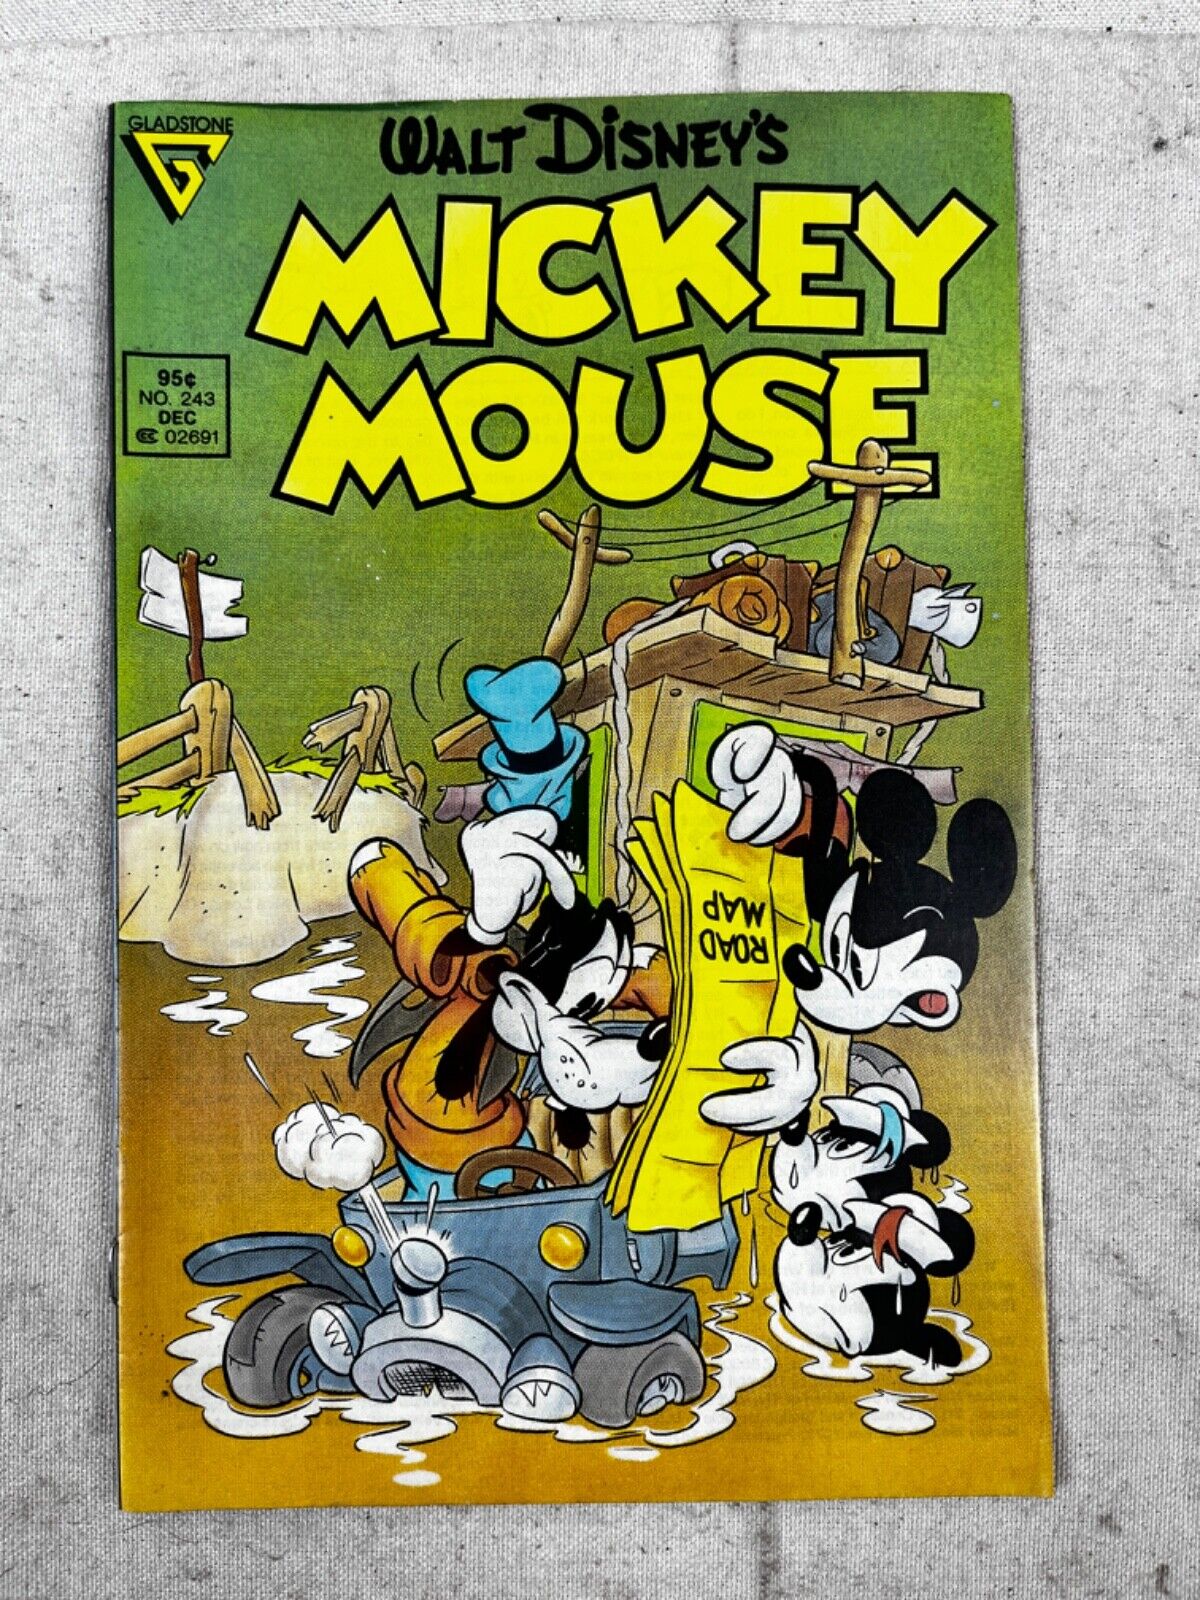 Walt Disney\'s Mickey Mouse Comic Book #243 Gladstone 1988 Pre-Owned